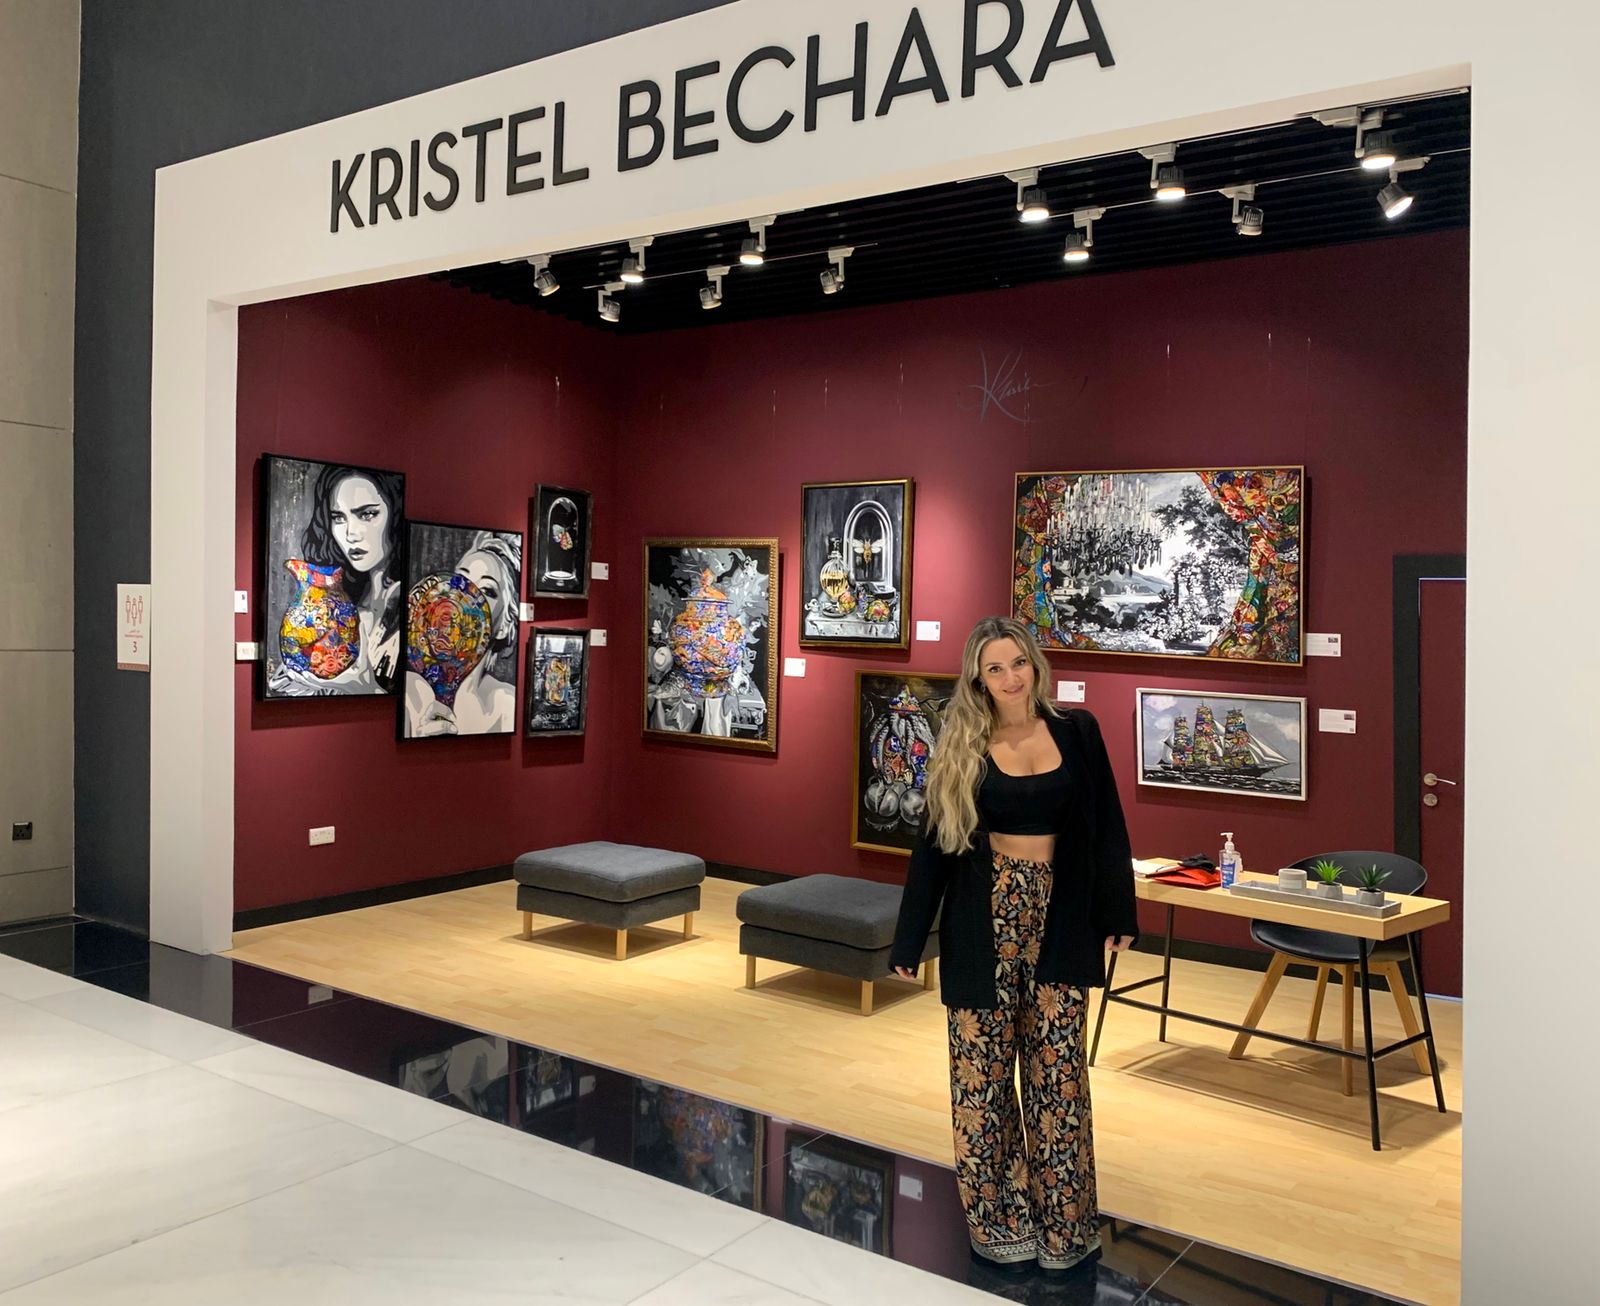 Kristel Bechara shares all the lessons that she learned over the years being an Artepreneur and dealing with clients and collectors!